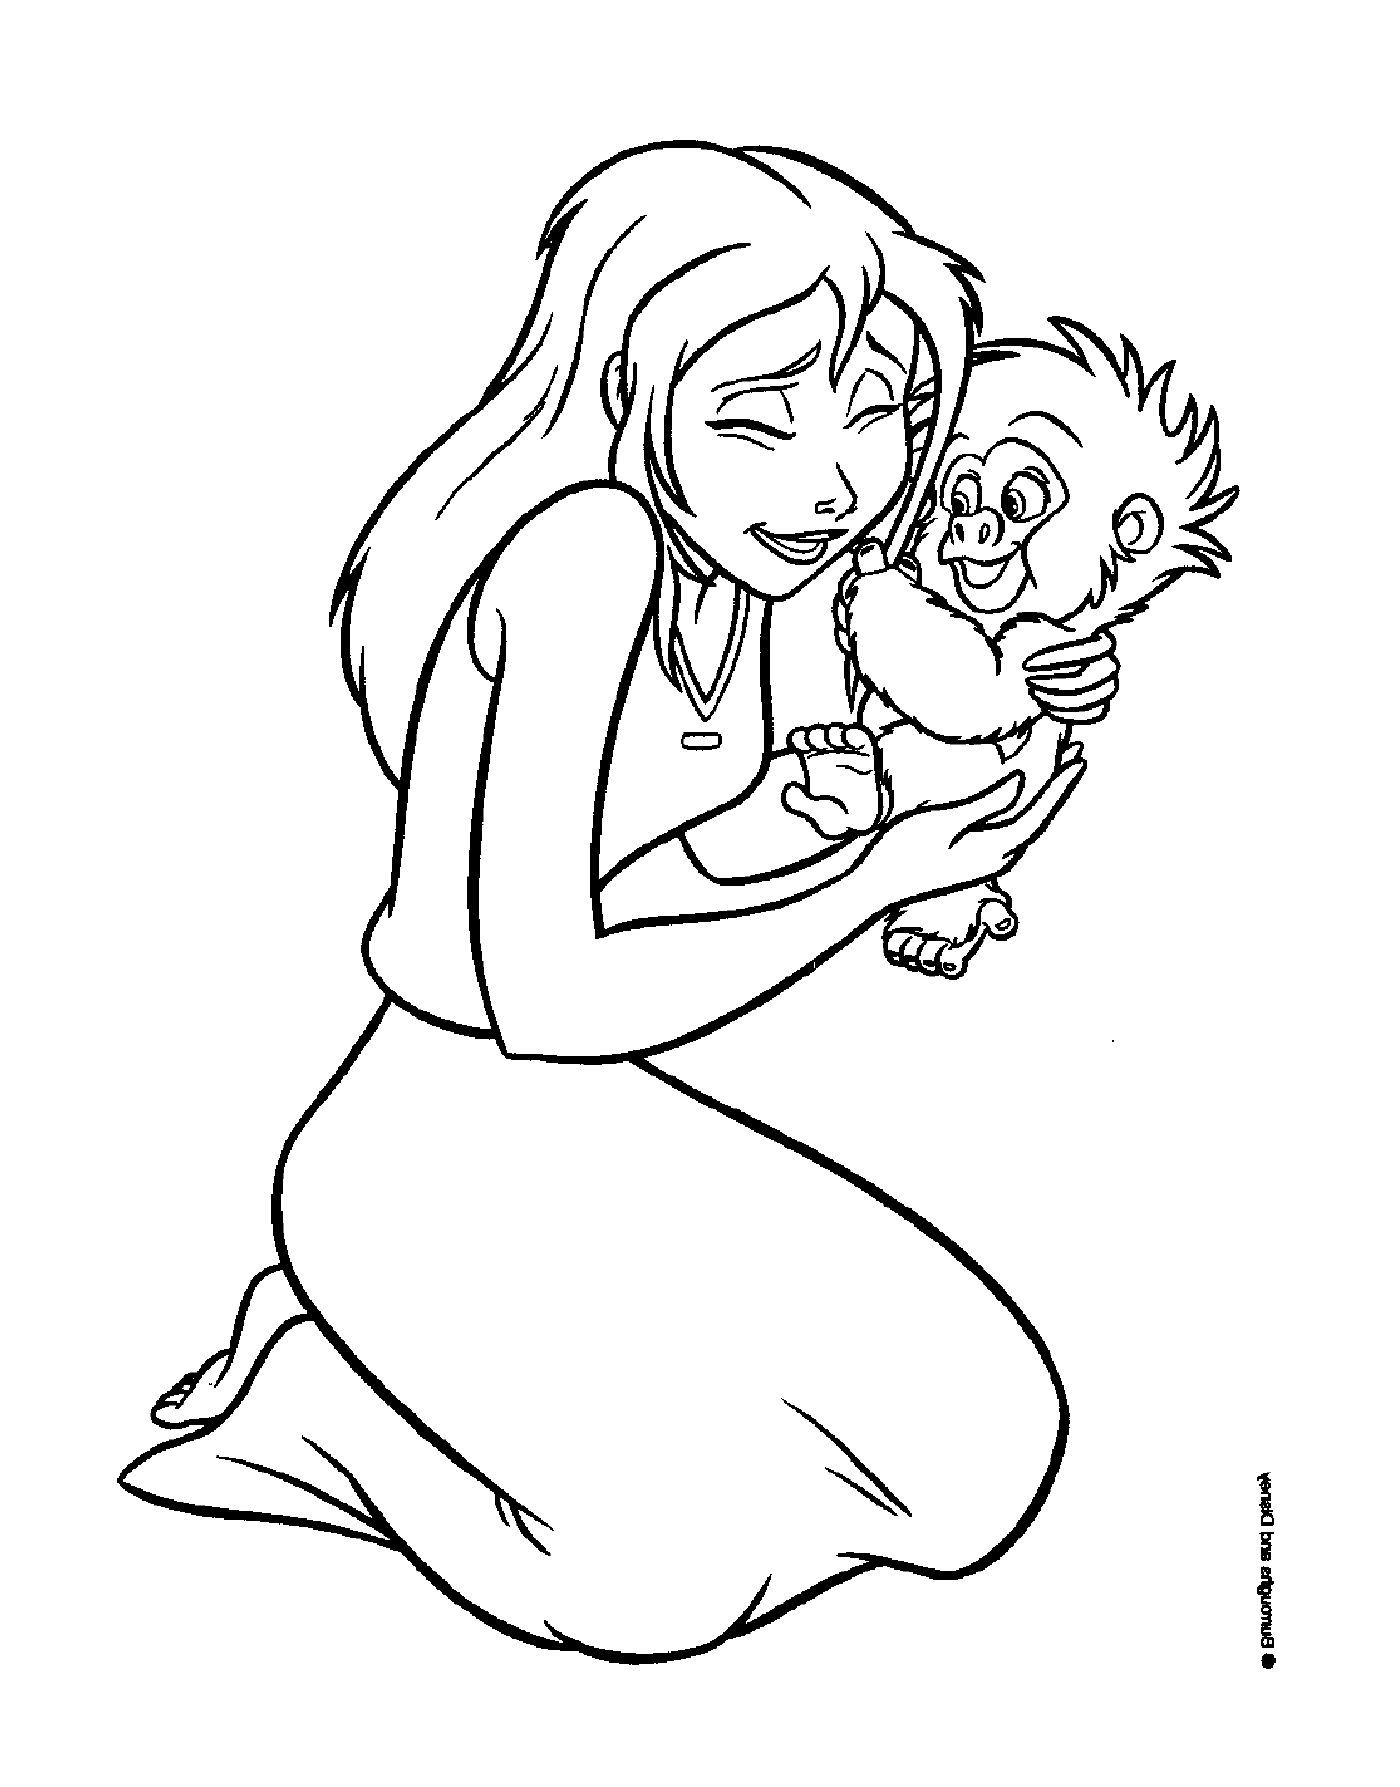  Woman holding a baby monkey in her arms 